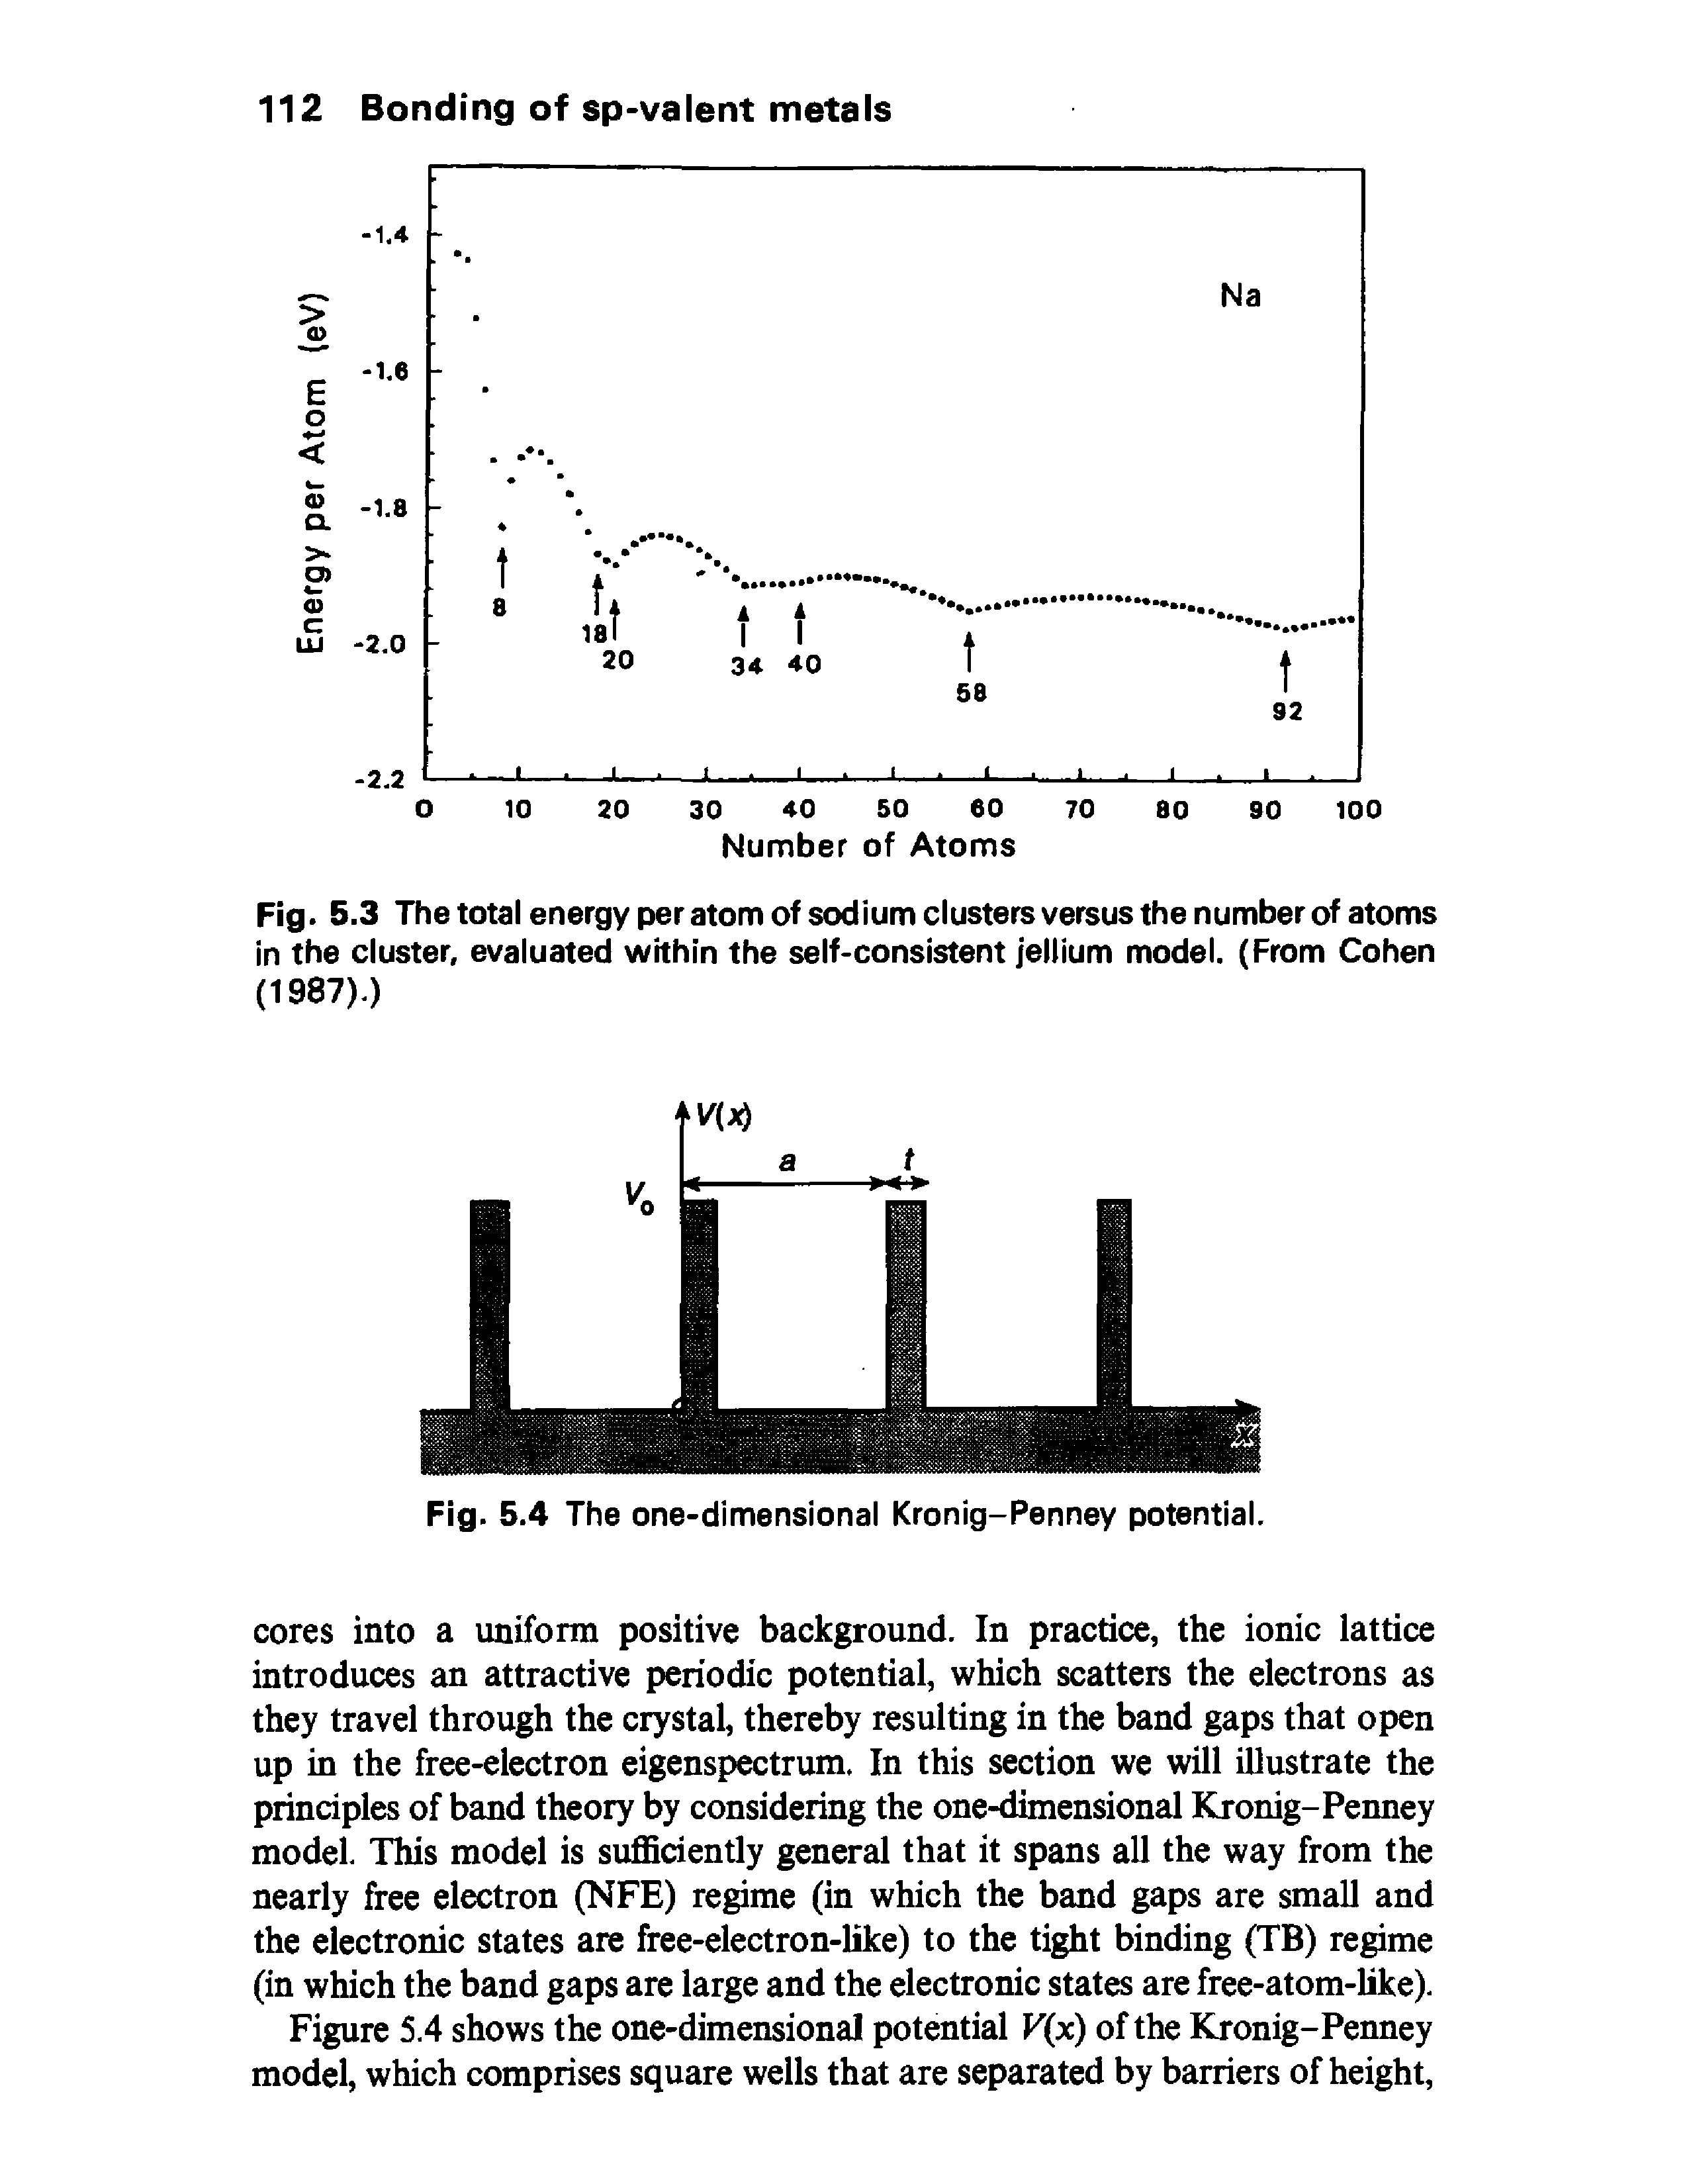 Fig. 5.3 The total energy per atom of sodium clusters versus the number of atoms in the cluster, evaluated within the self-consistent jellium model. (From Cohen (1987).)...